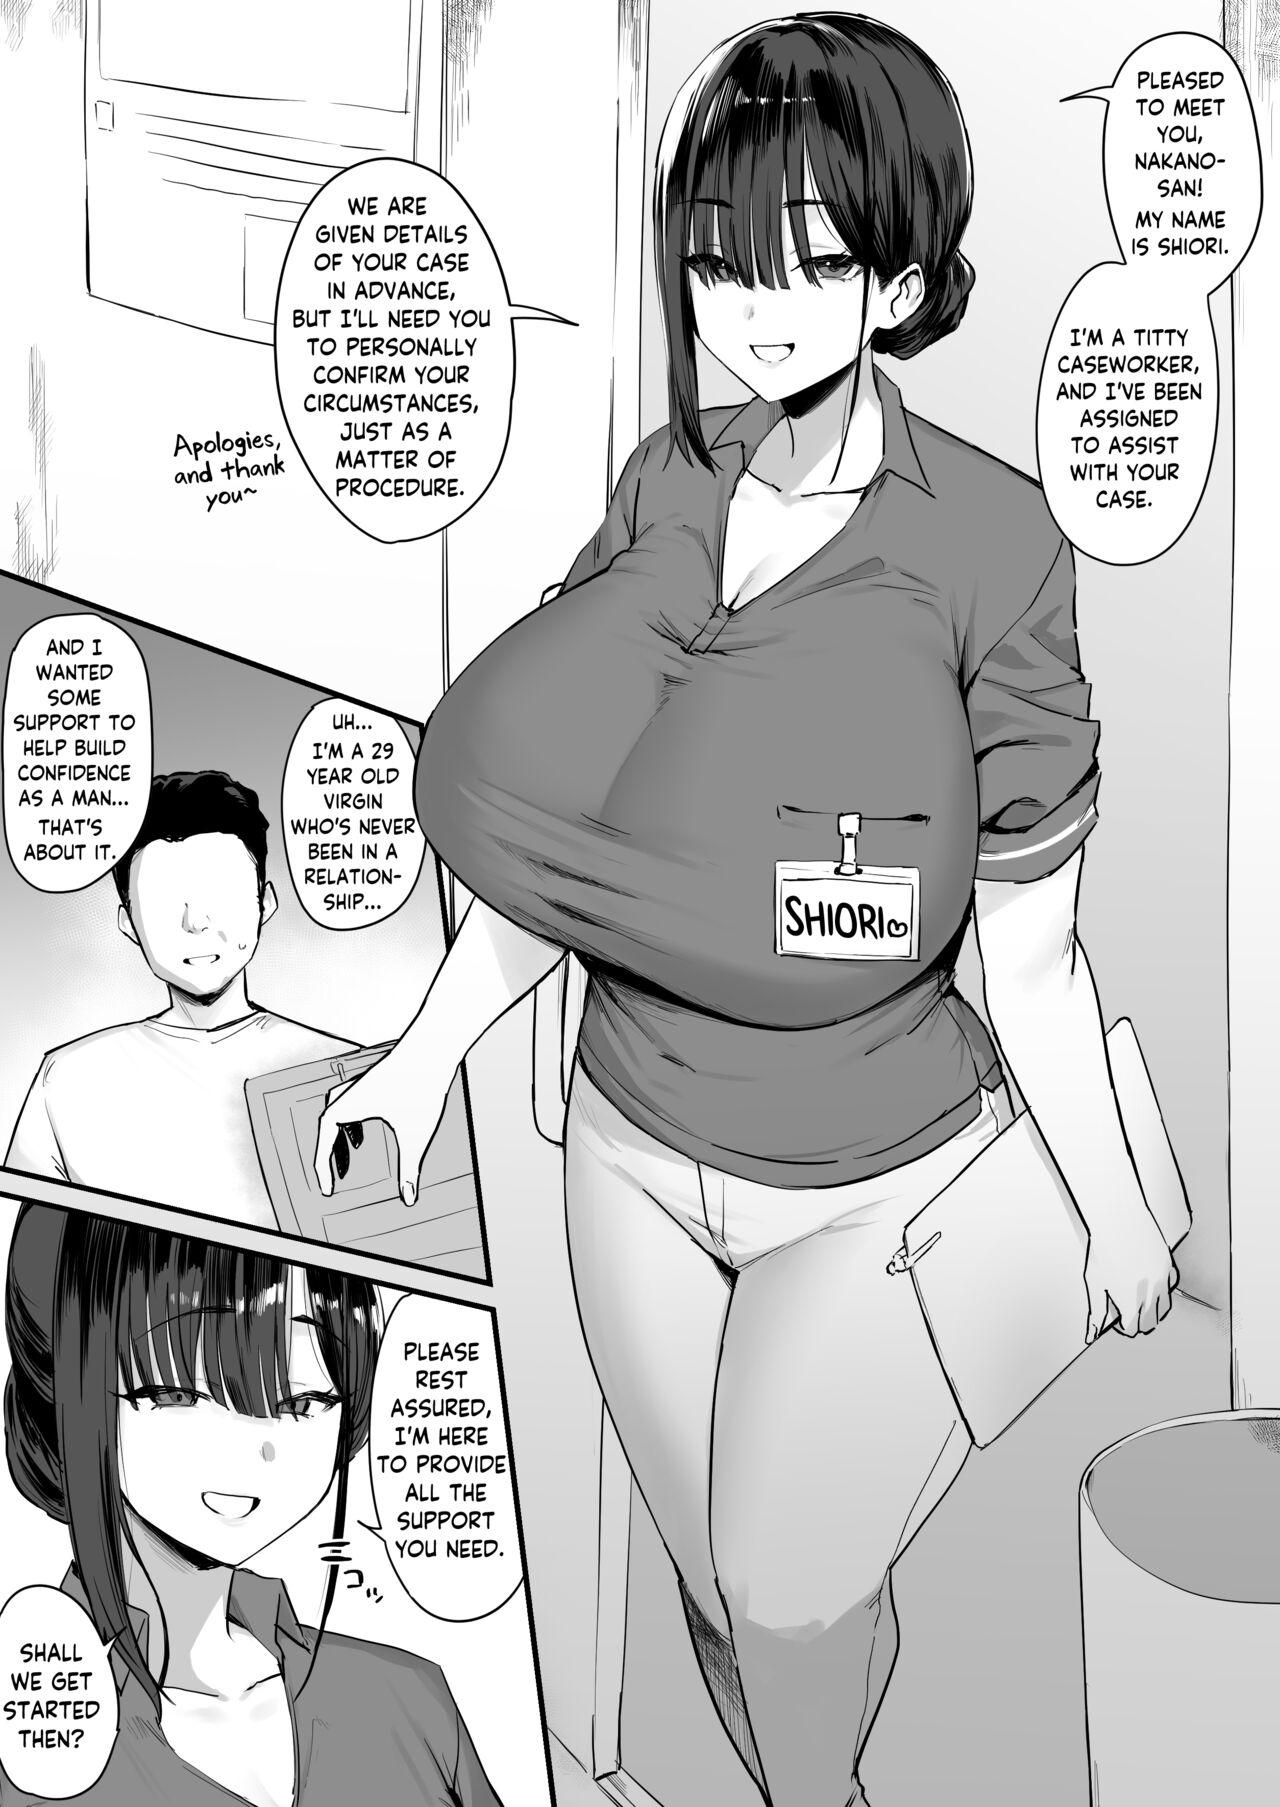 Breeding Oppai Caseworker | Titty Caseworker - Original Couple Fucking - Page 1